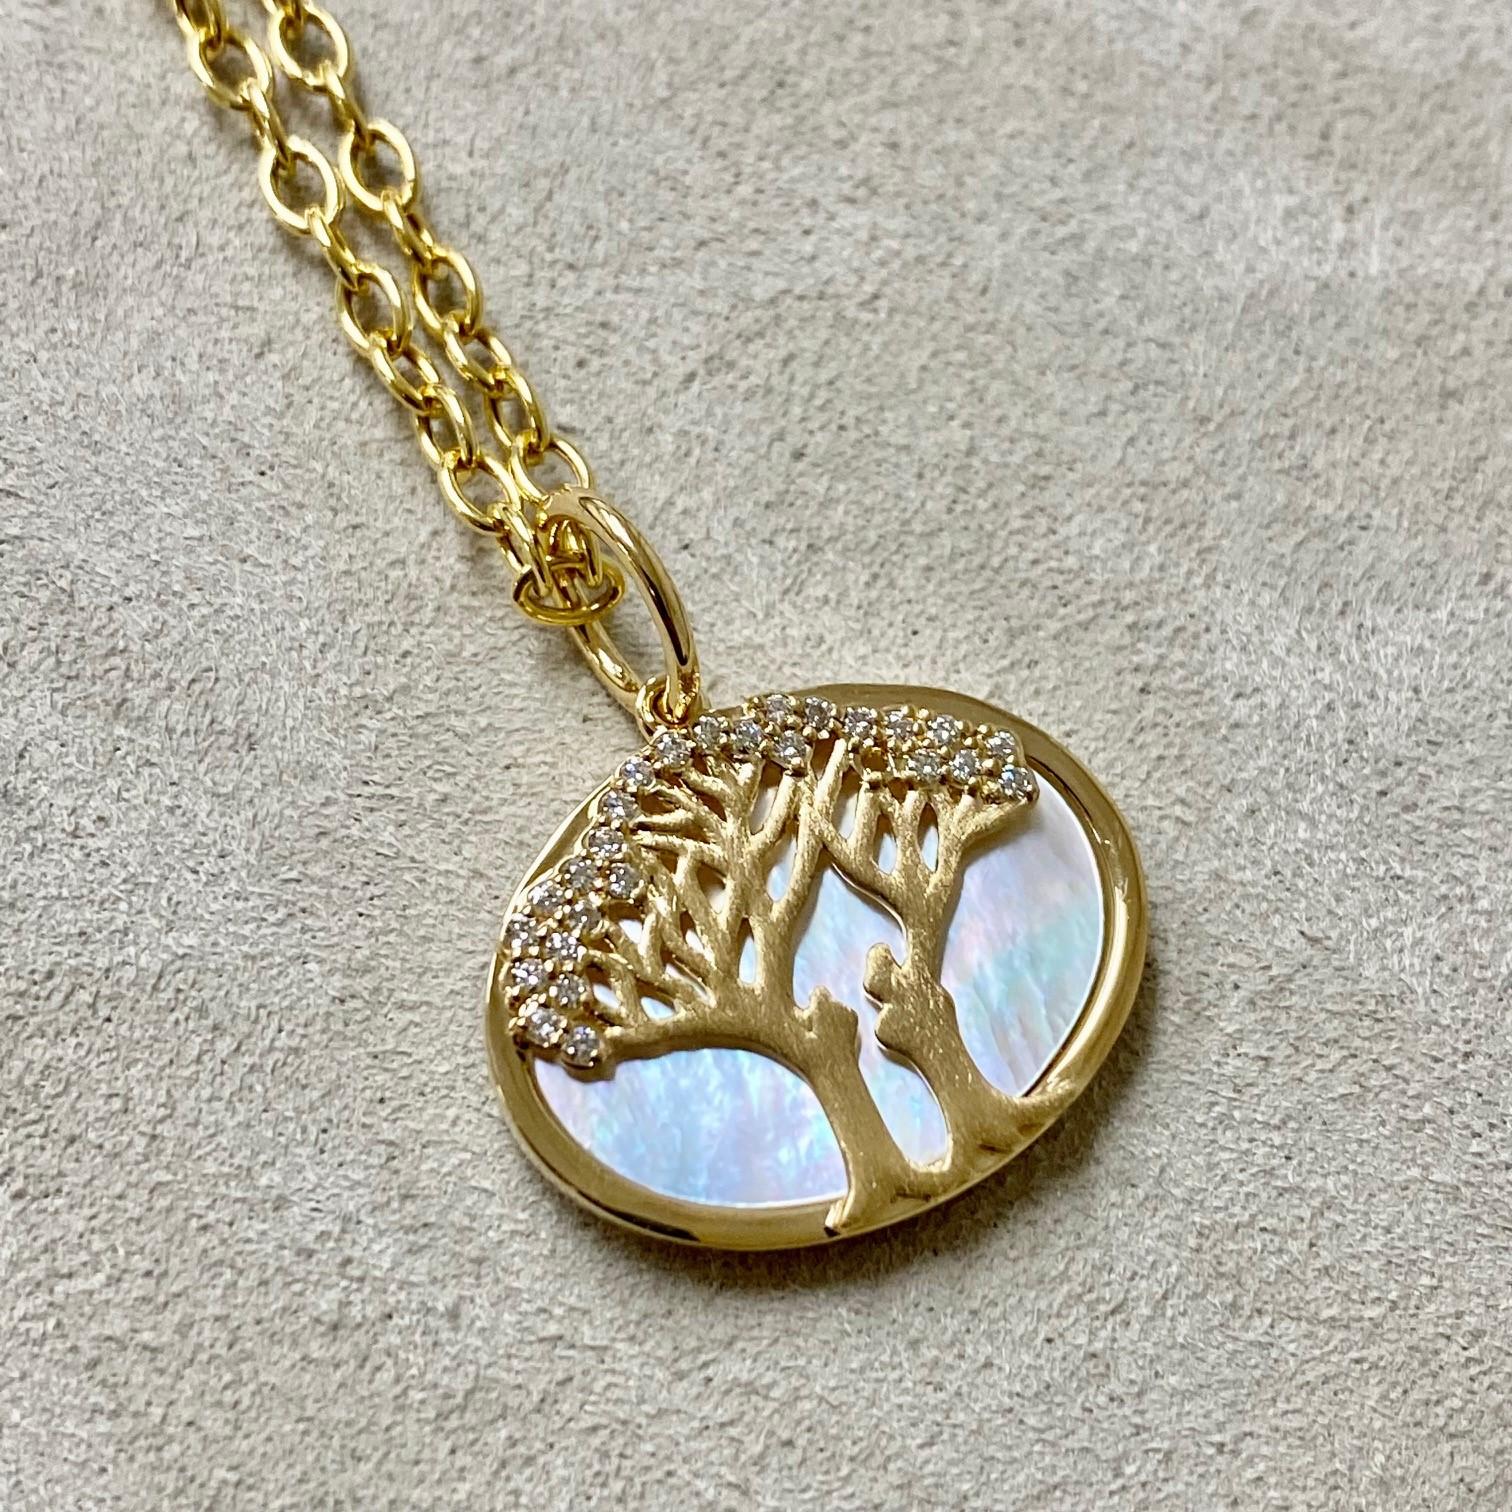 Created in 18 karat yellow gold
Mother of pearl 4.50 carats approx.
Champagne diamonds 0.10 carat approx.
Limited edition
Chain sold separately

 About the Designers ~ Dharmesh & Namrata

Drawing inspiration from little things, Dharmesh & Namrata